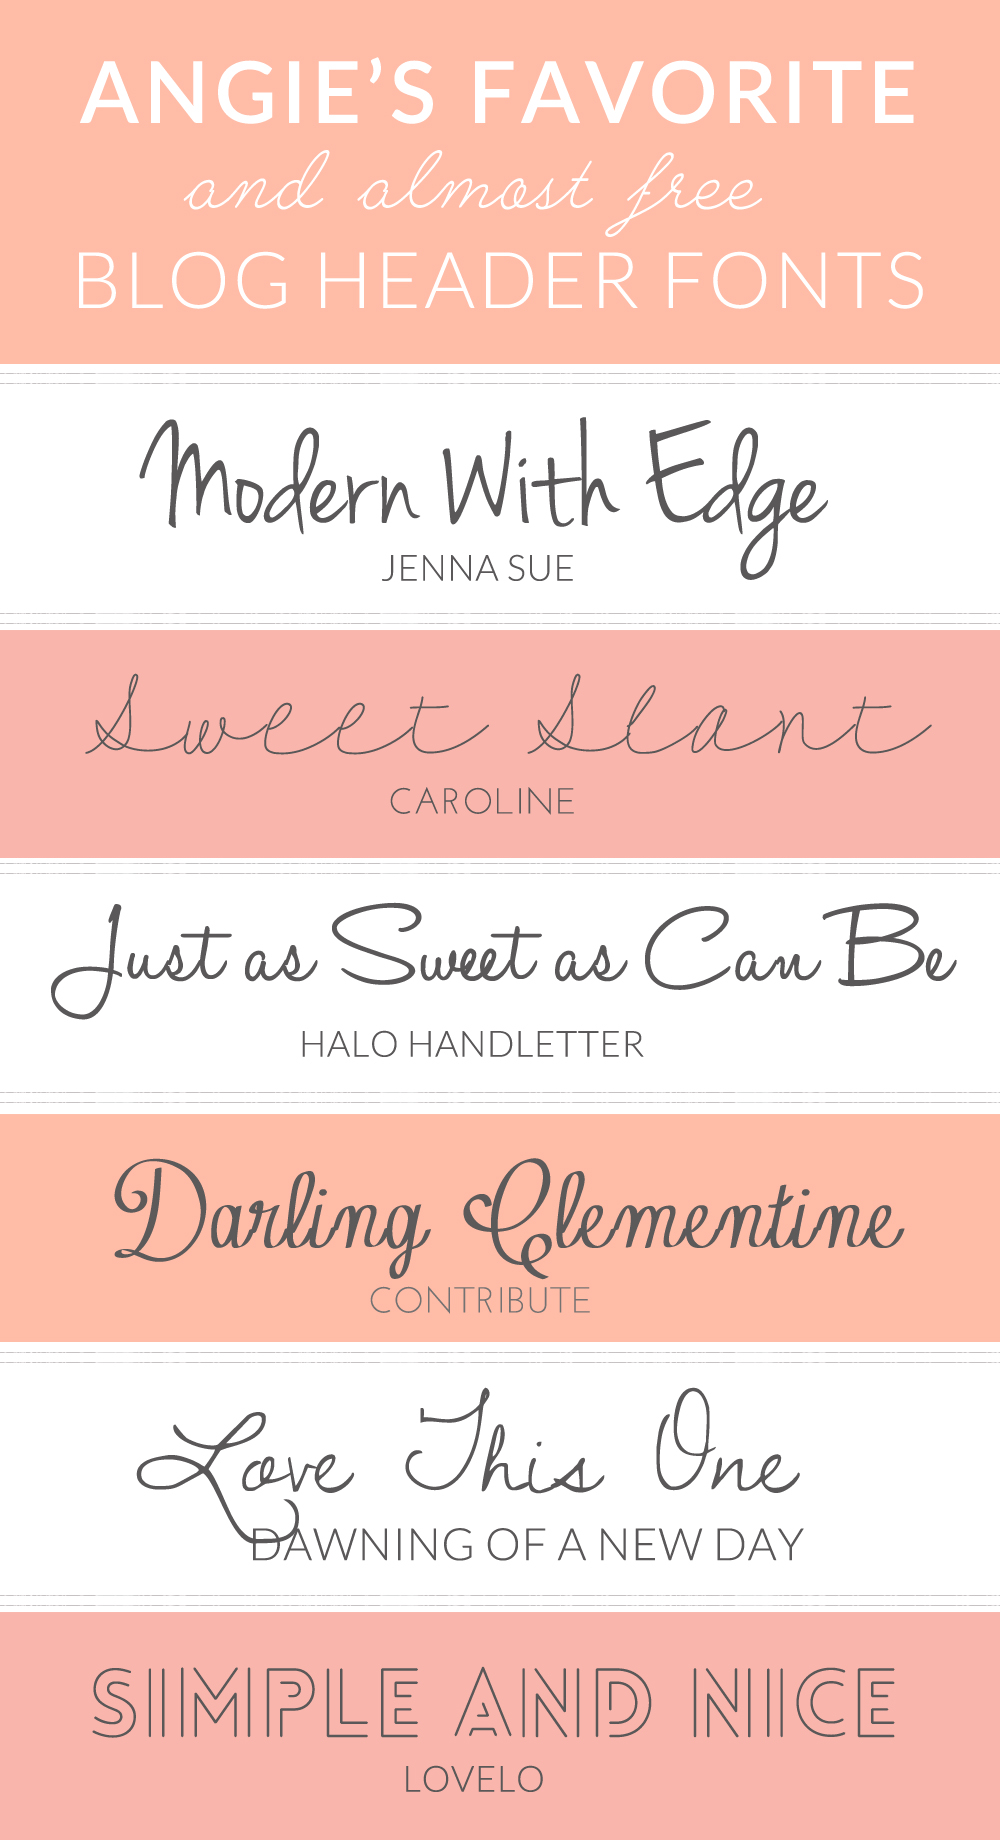 Here are My Favorite and Free Fonts For Blog Headers